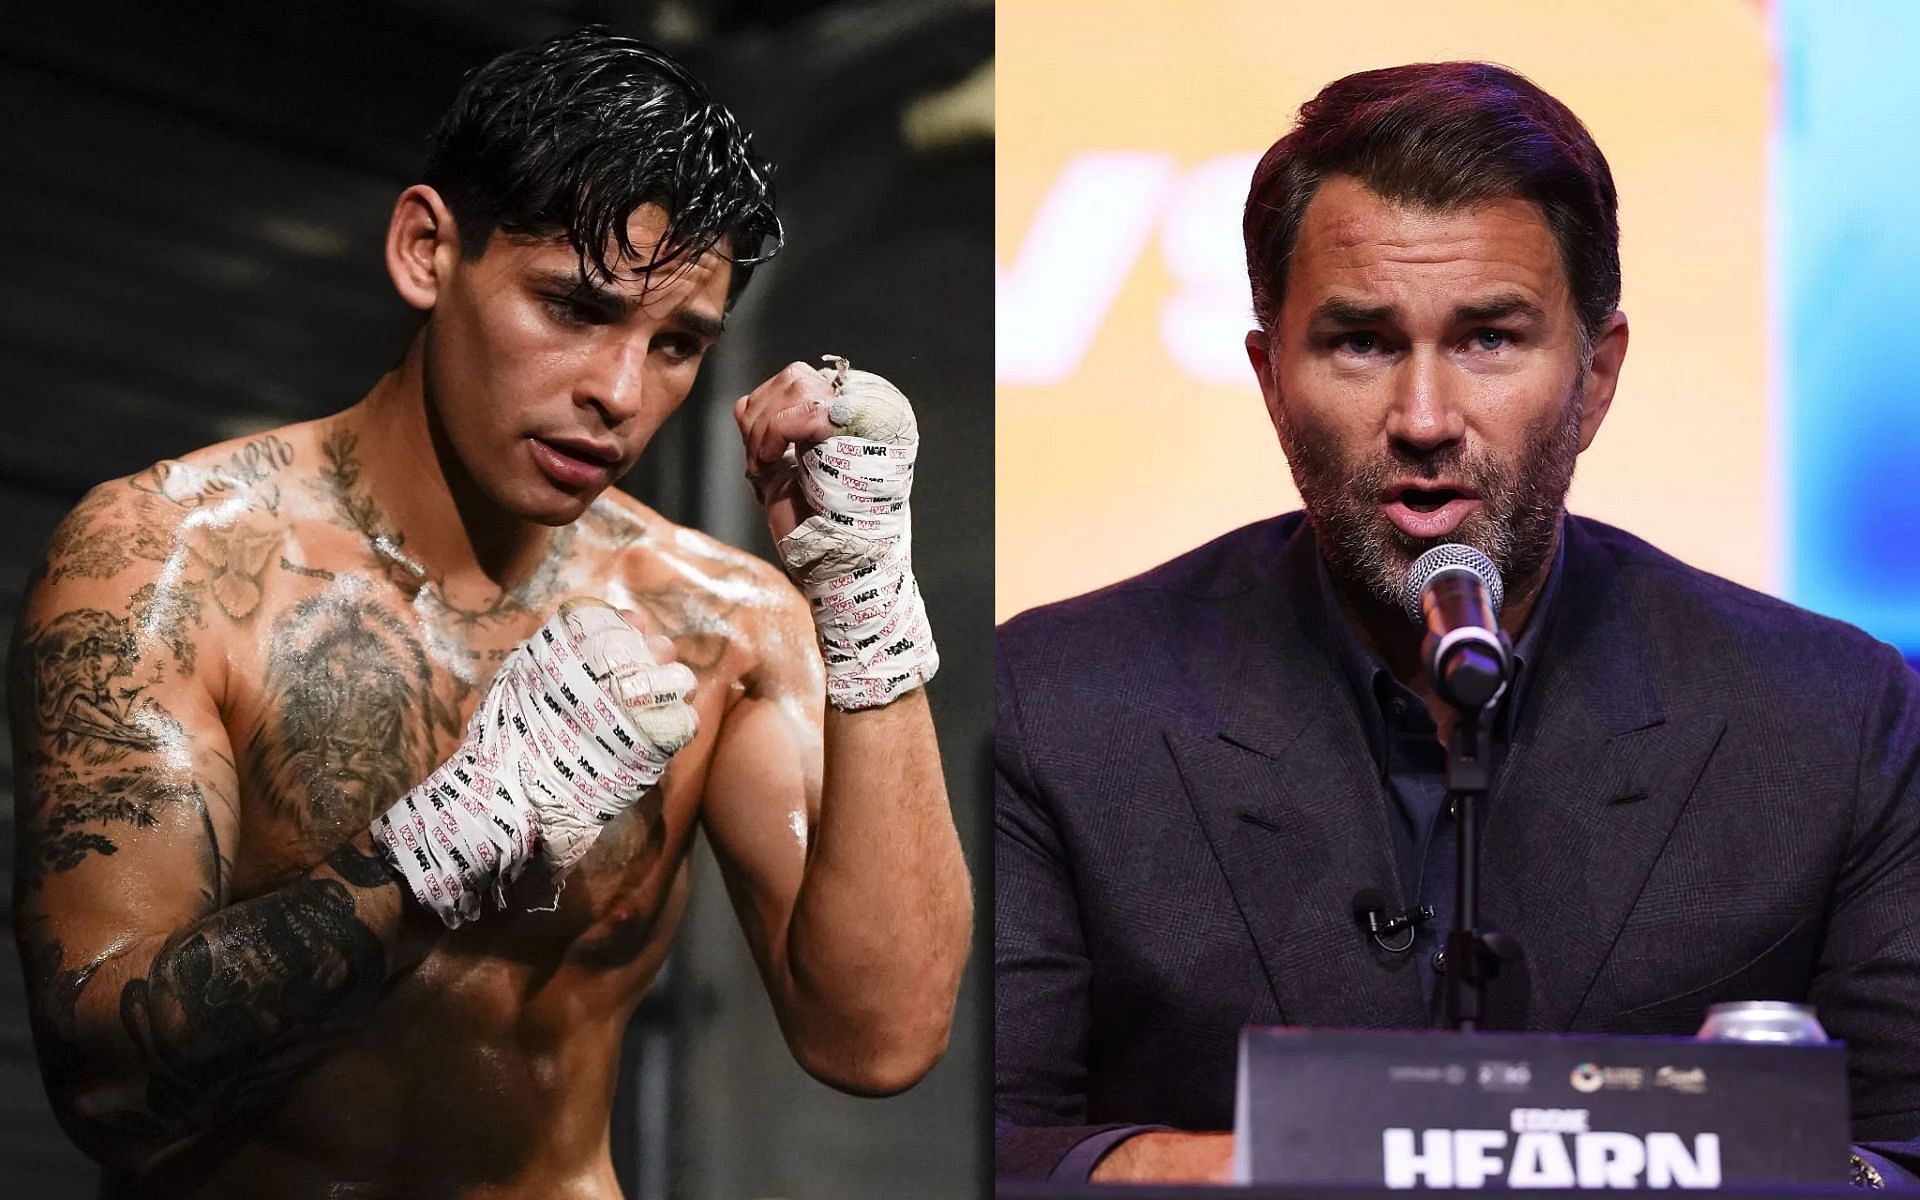 Eddie Hearn (right) is worried for Ryan Garcia (left) ahead of one-year ban [Images courtesy: Getty Images]